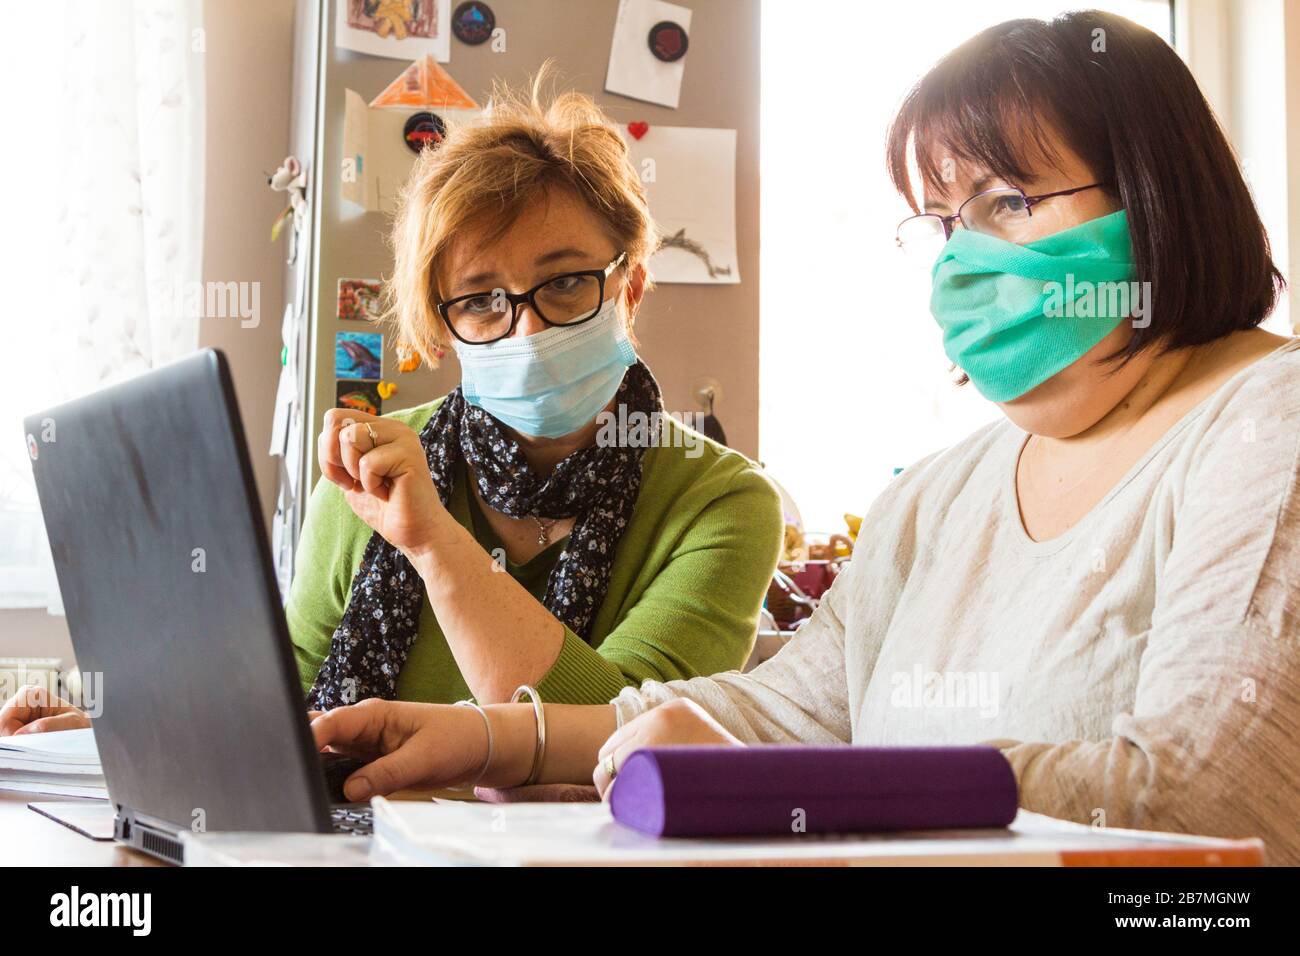 Two middle-age women teachers wearing surgical face mask discussing digital education at home during coronavirus restrictions Stock Photo